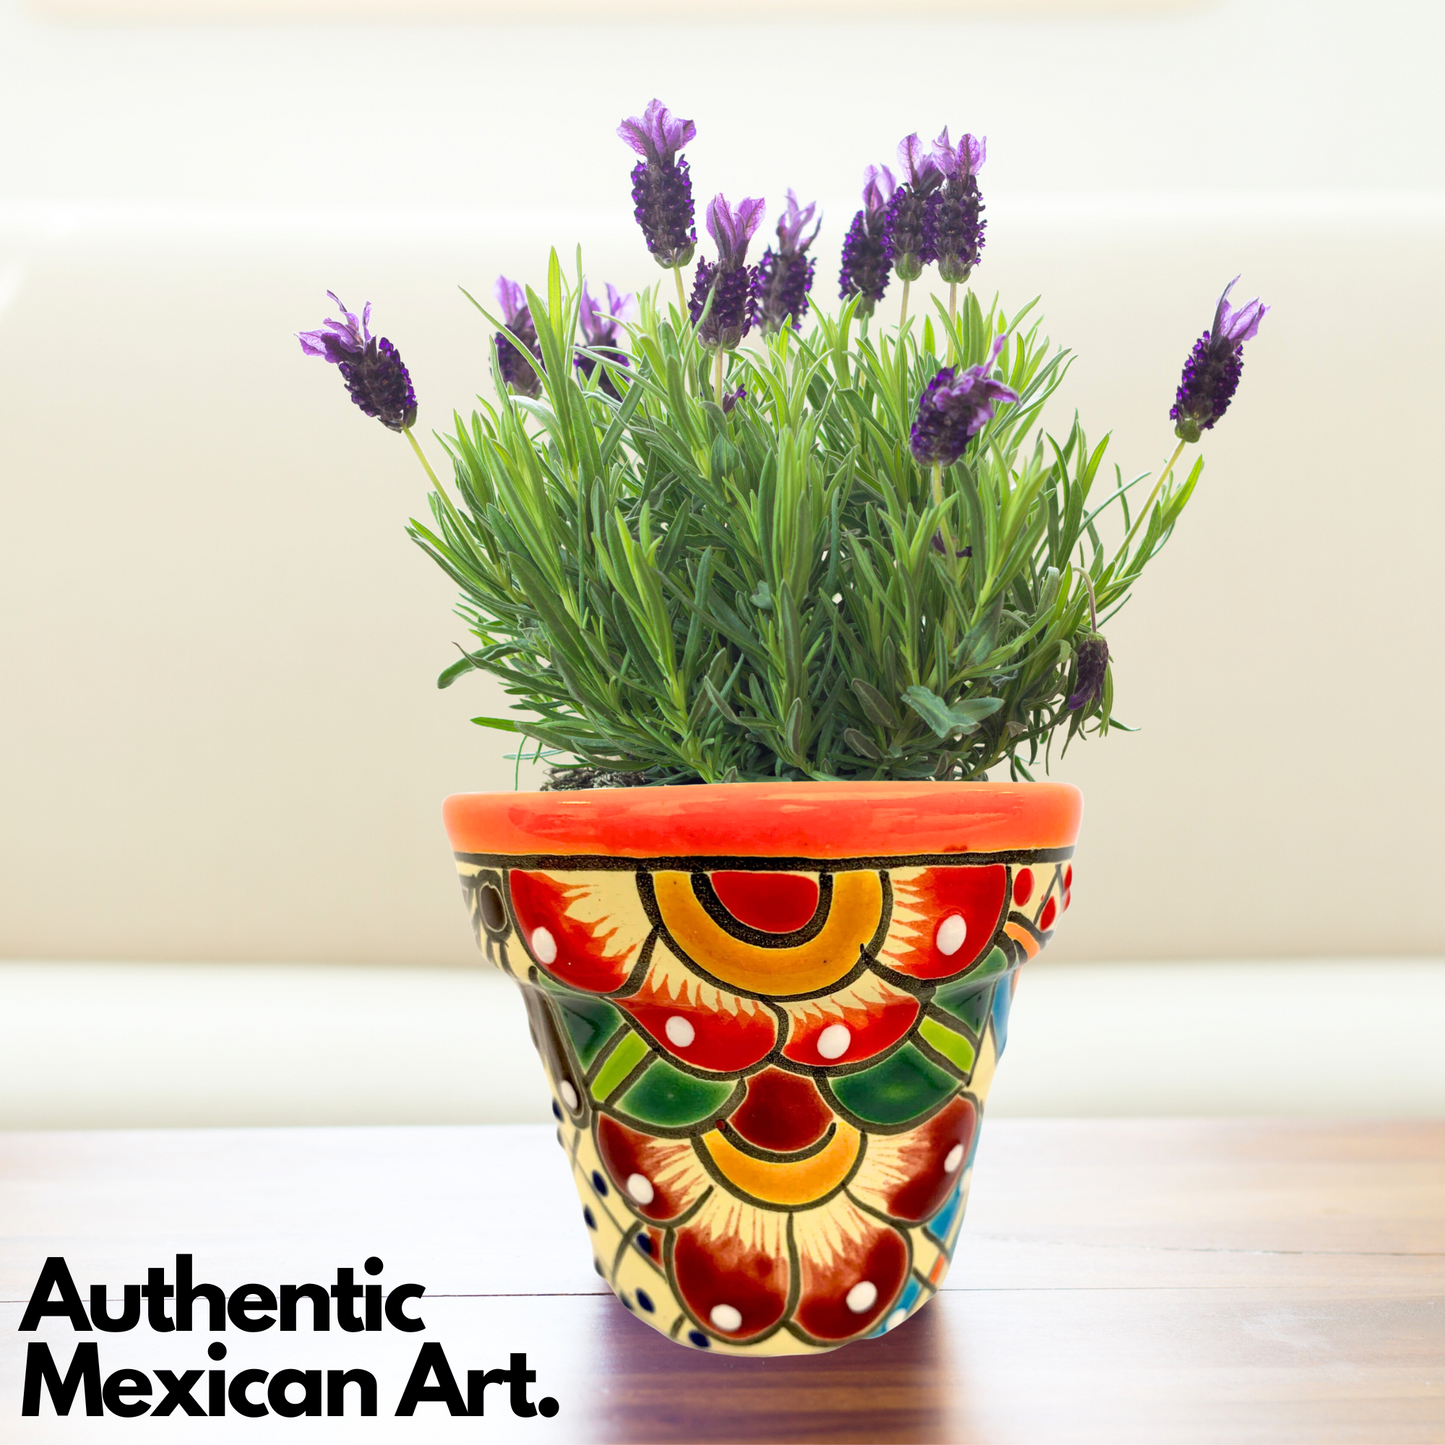 authentic mexican art Talavera Ceramic Mini Plant Pots, hand-painted with vibrant designs by Mexican artisans, perfect for small plants and interior decor.